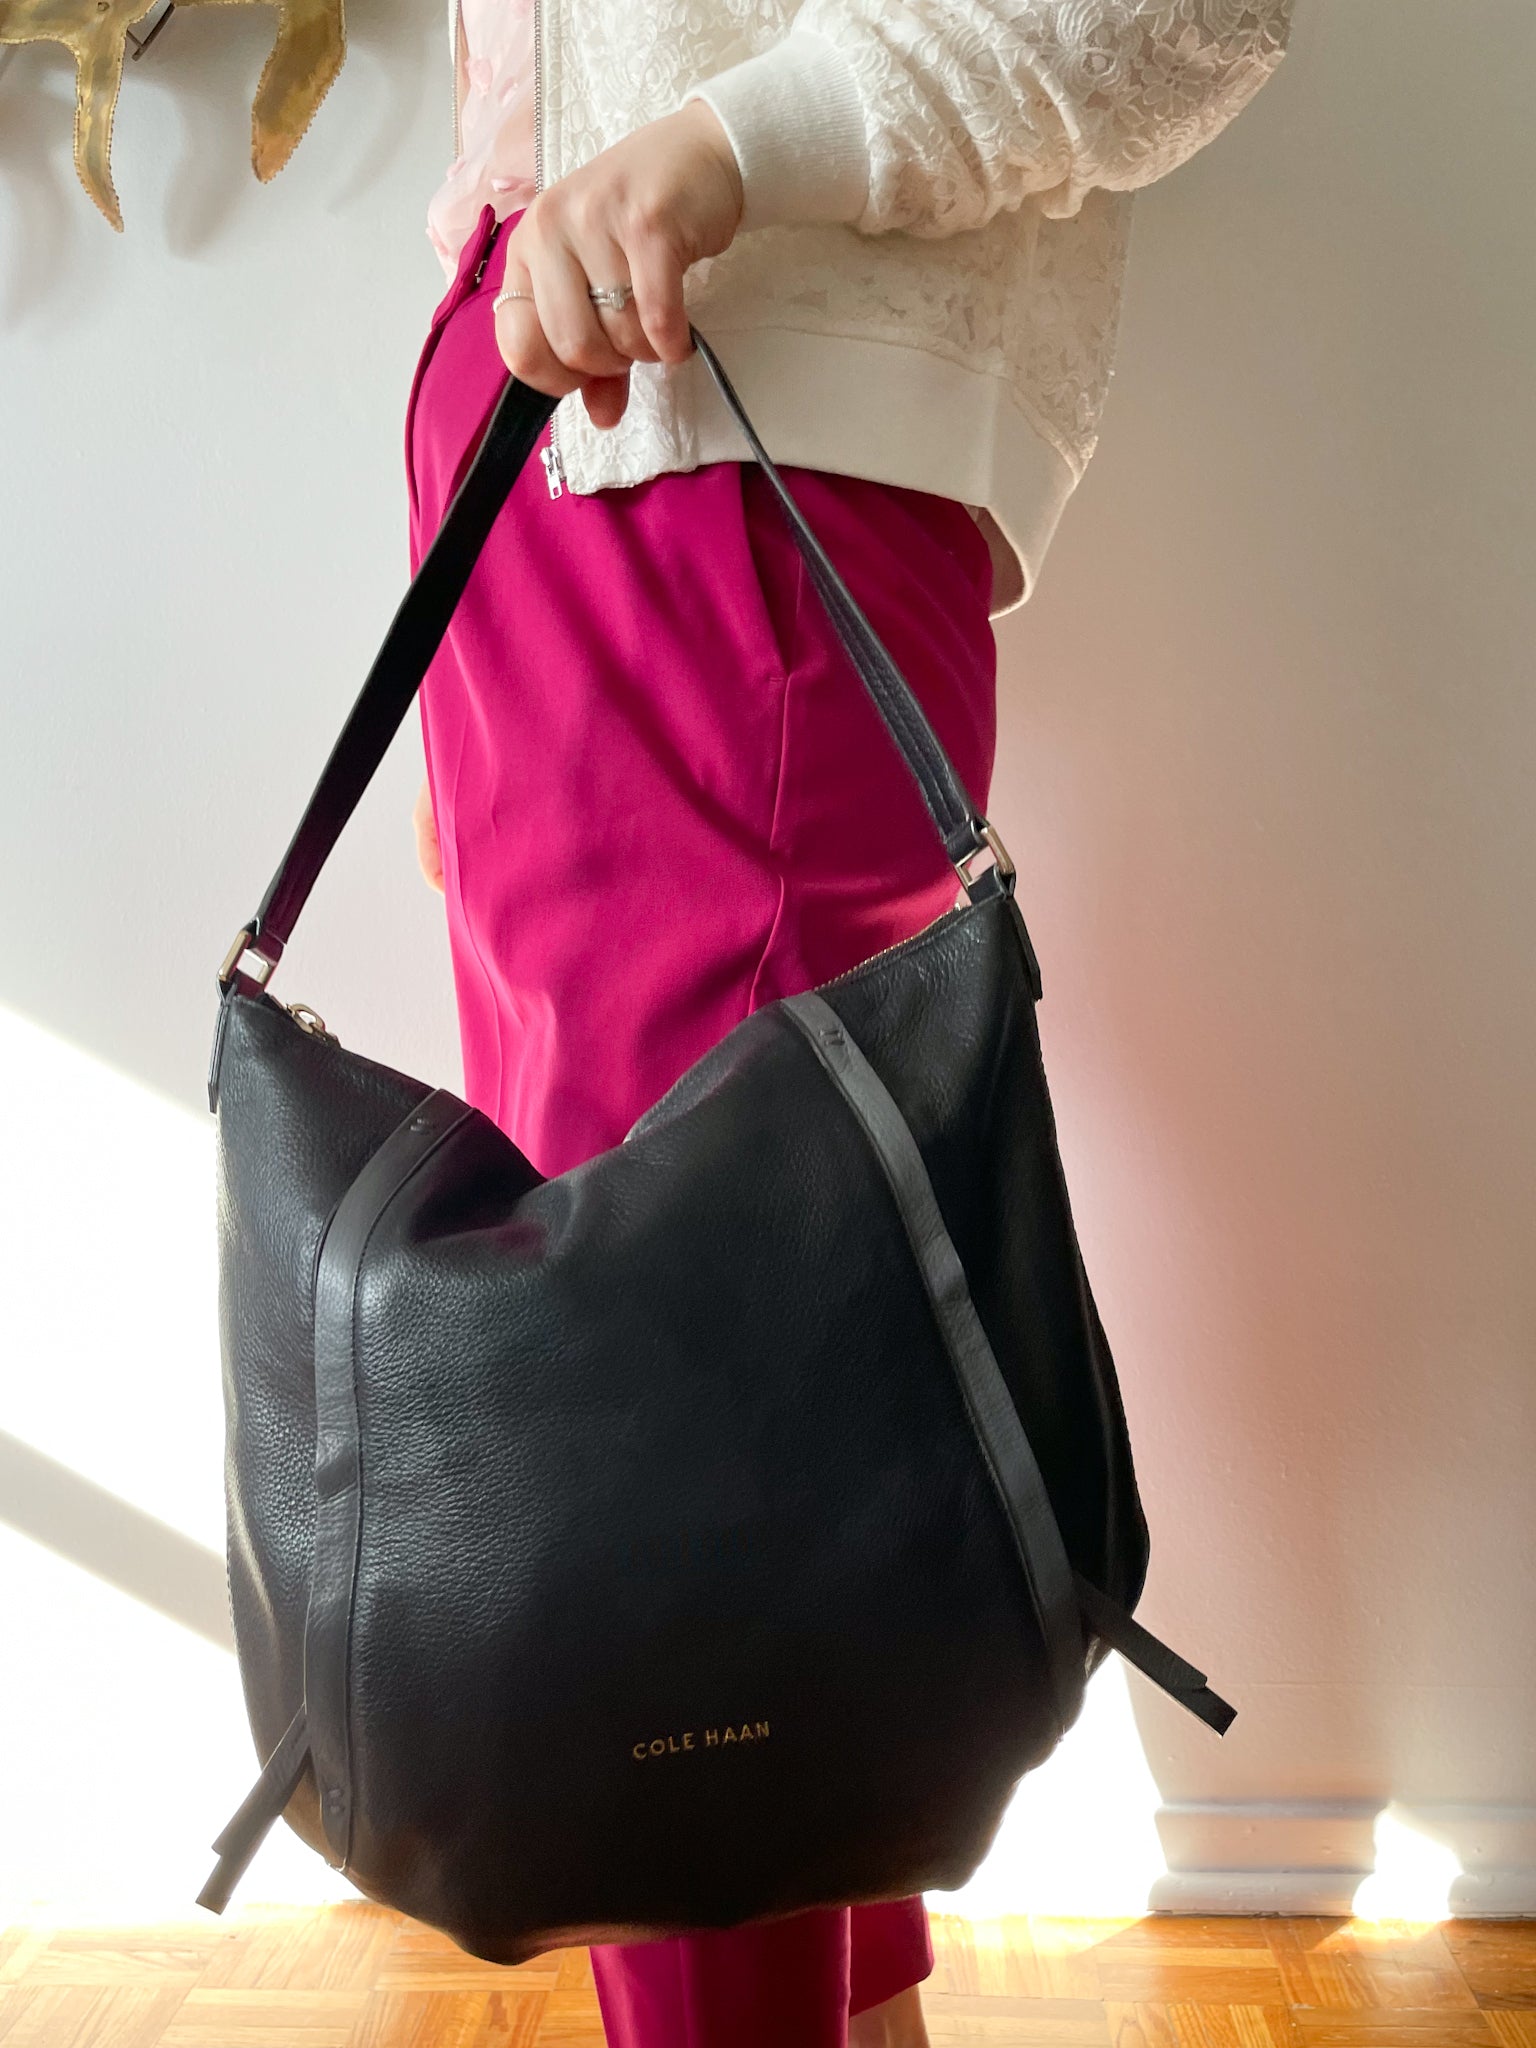 Cole Haan Black Leather Pebbled Handbag – Treasures Upscale Consignment